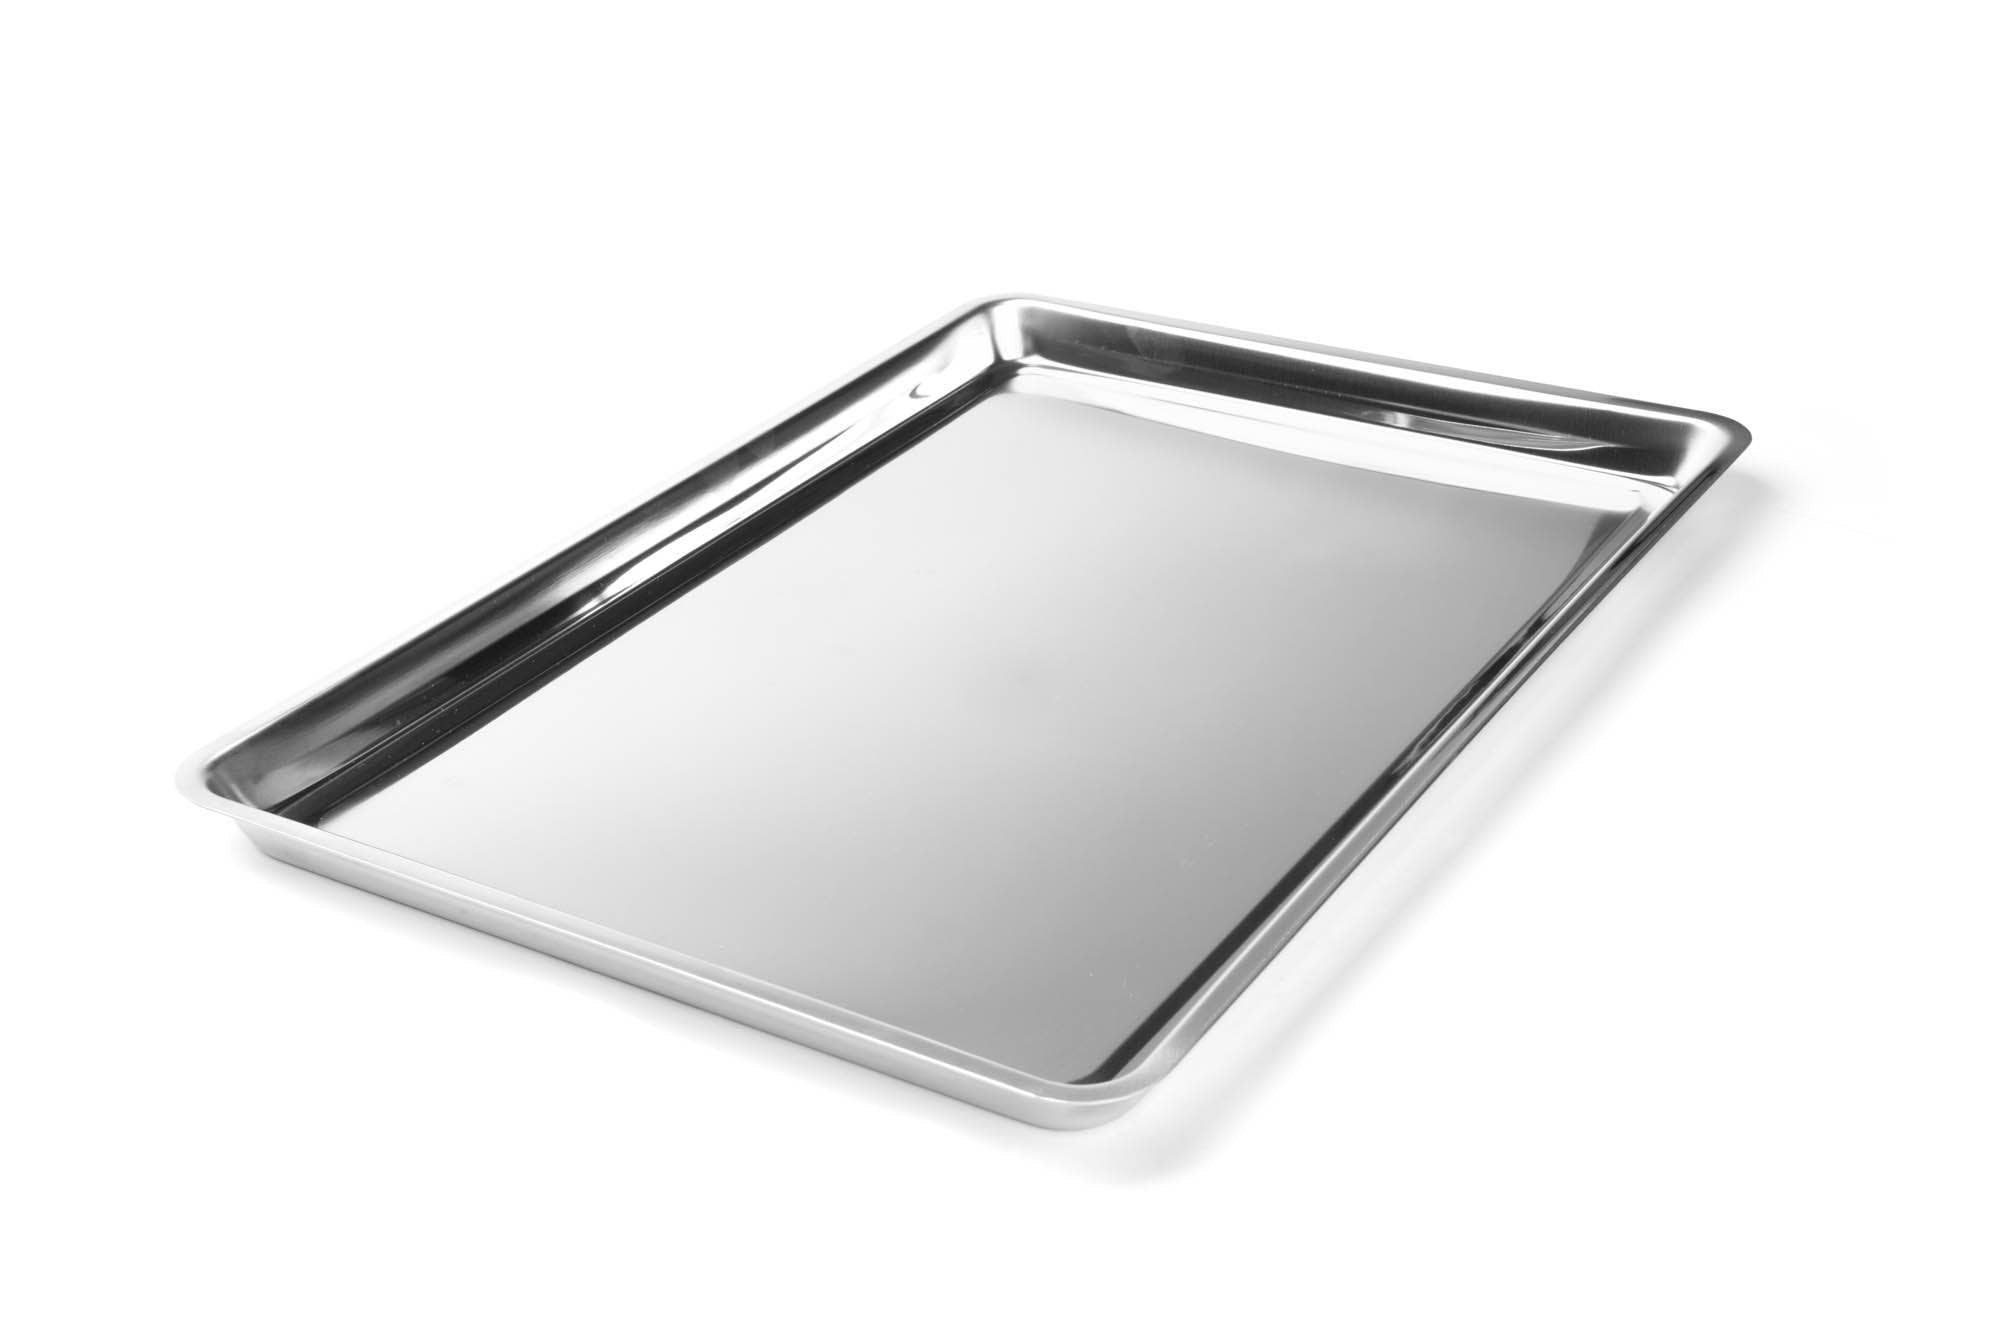 Cookie Sheet/ Baking Tray, Quarter Size, 1/2 X 13,, 56% OFF